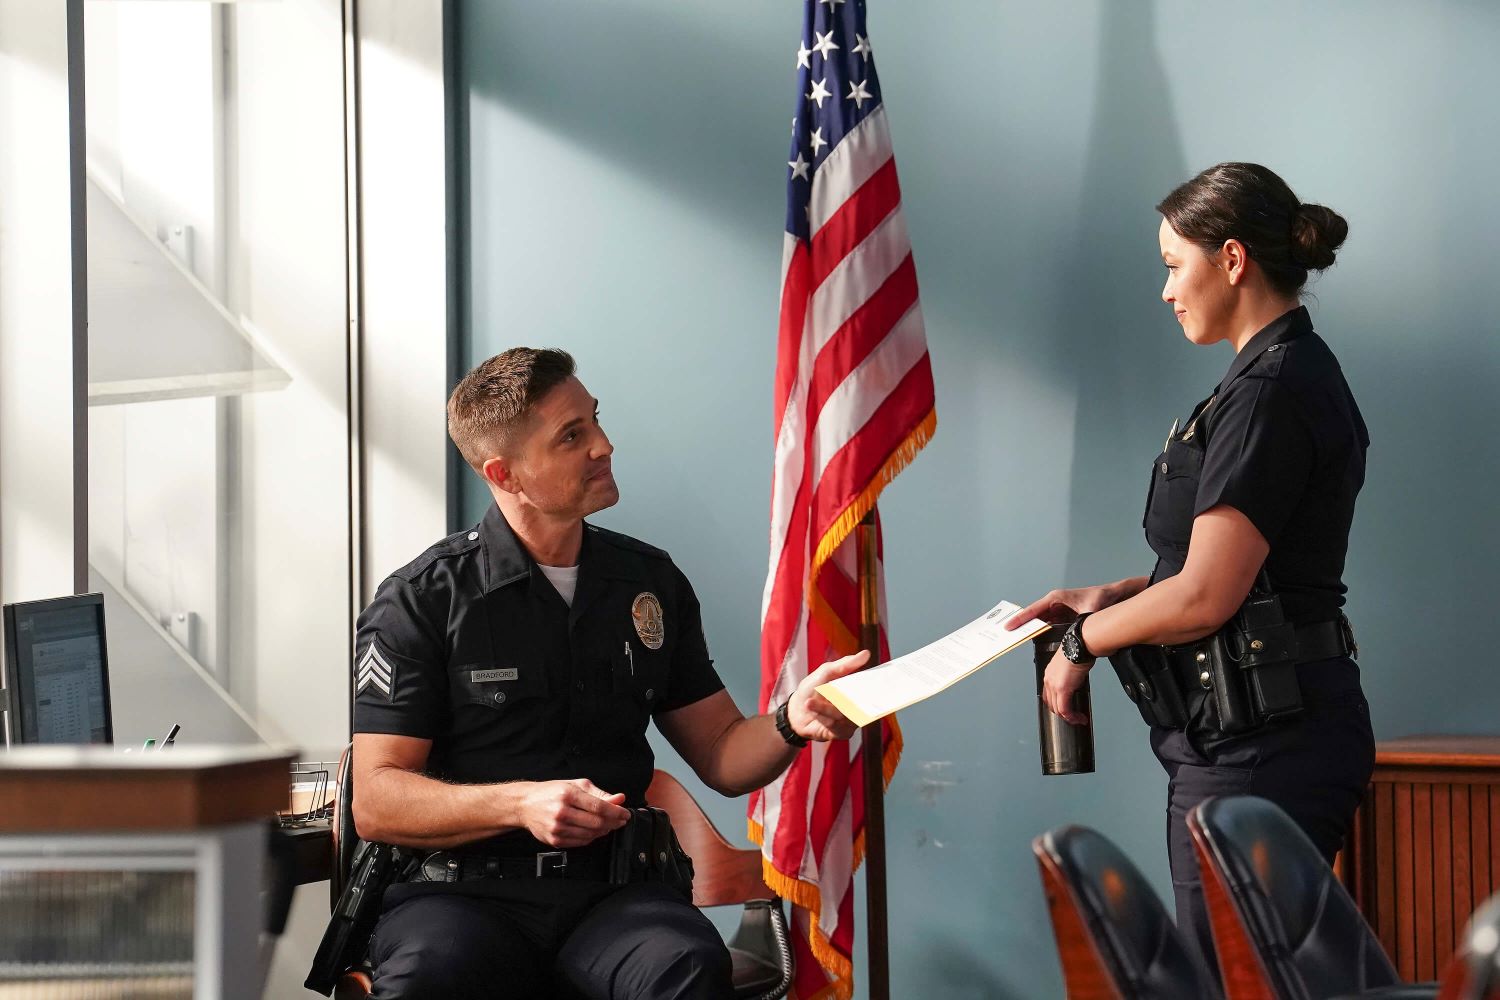 Eric Winter as Tim Bradford and Melissa O'Neil as Lucy Chen in 'The Rookie' on ABC, which has yet to be renewed for season 6. In the picture, Tim and Lucy wear their dark blue police uniforms.